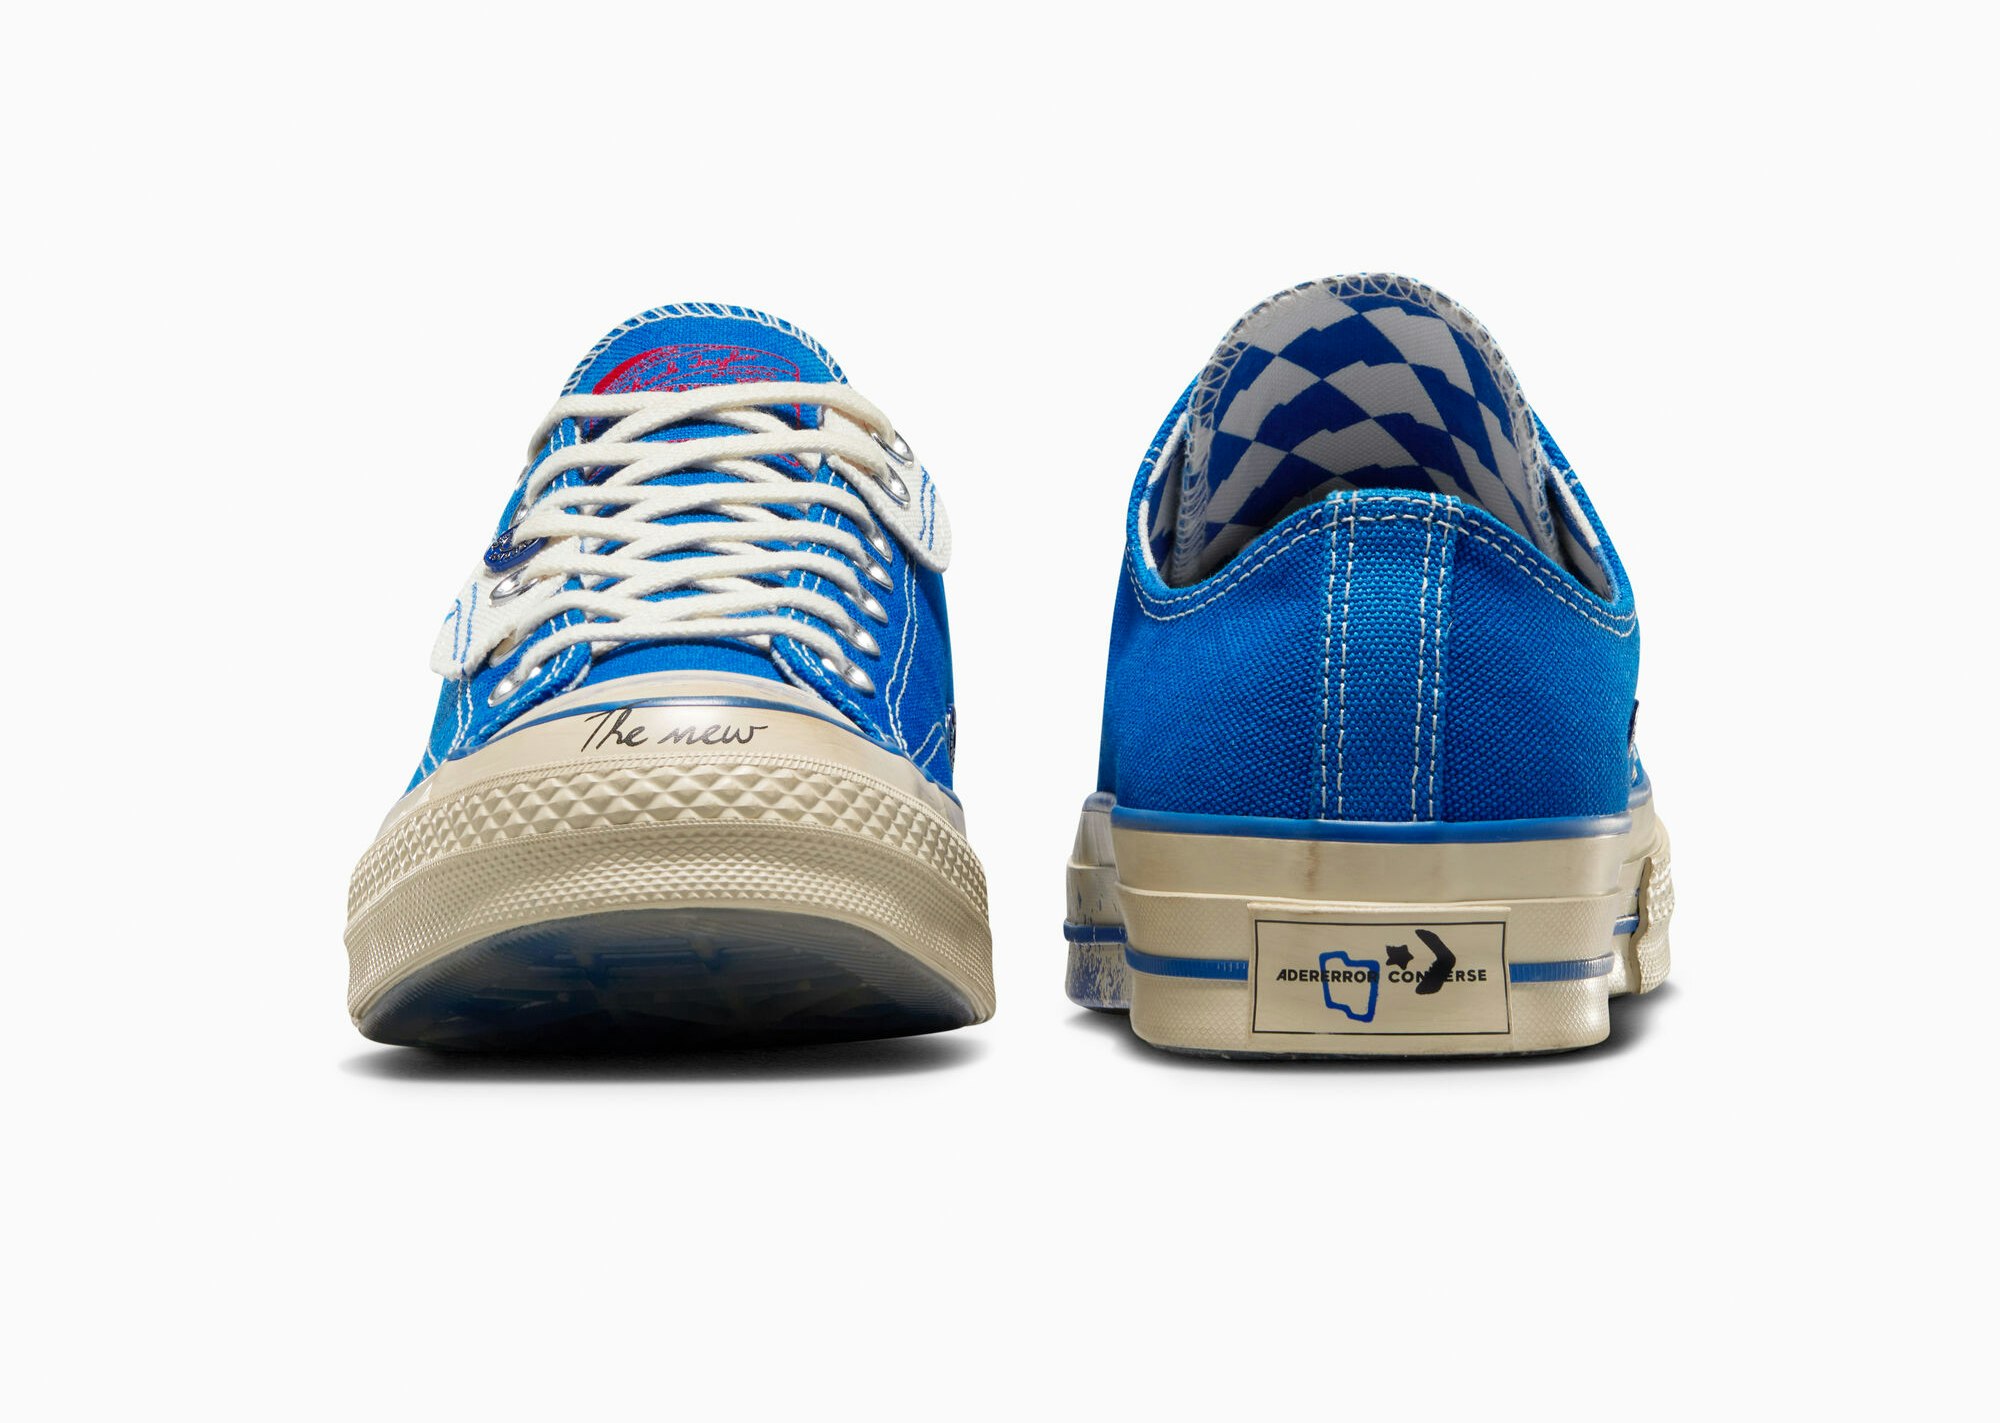 ADER ERROR x Converse Chuck 70 Low "Imperial Blue"